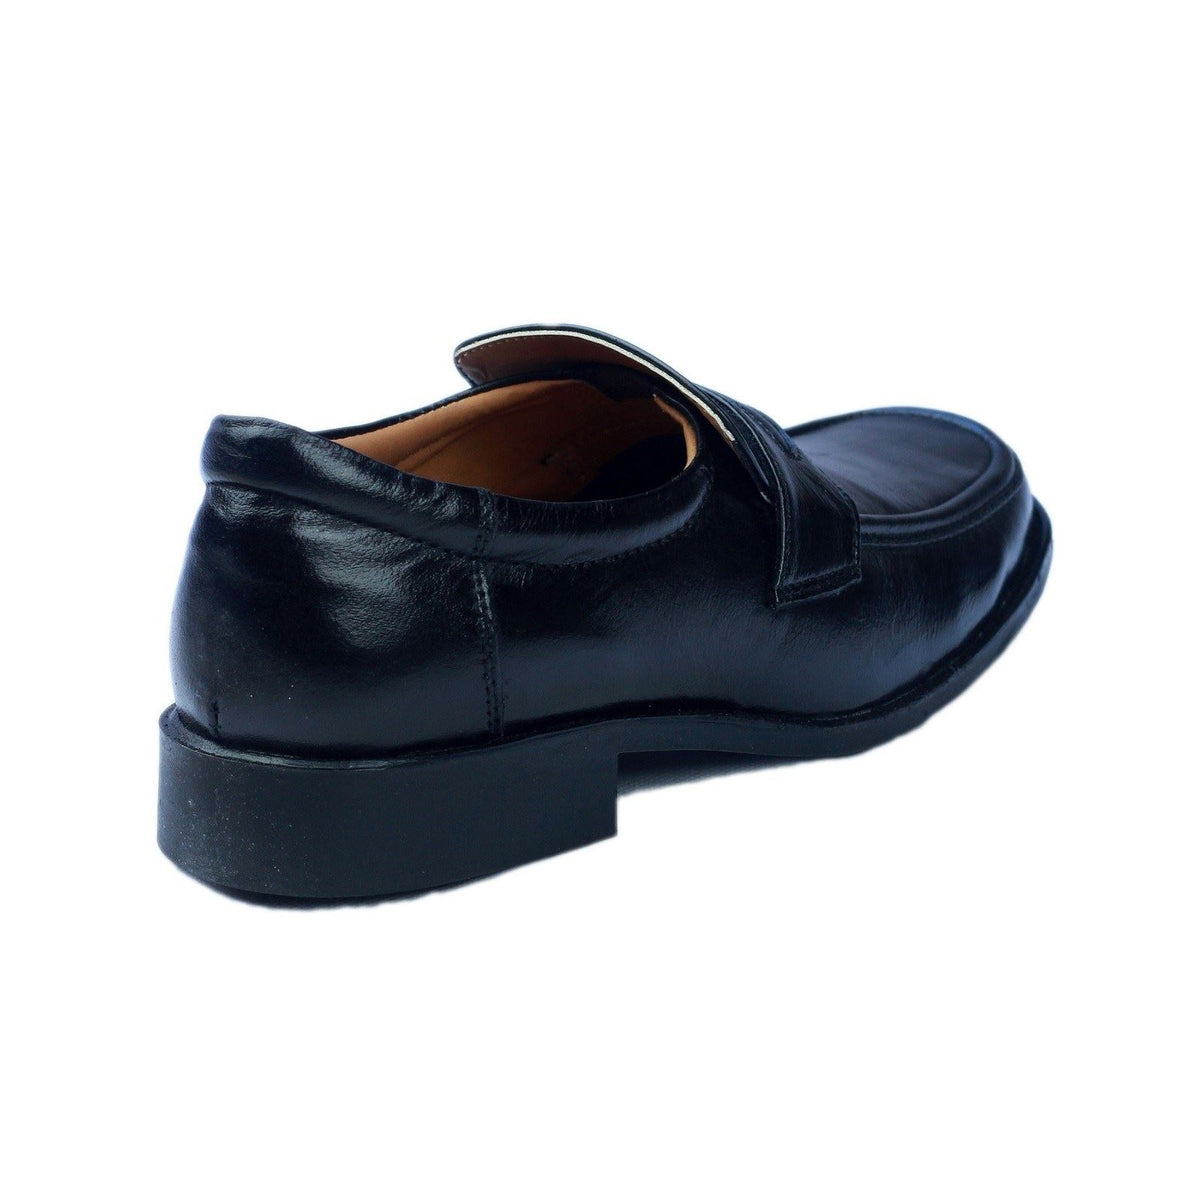 Amblers Manchester Leather Loafer